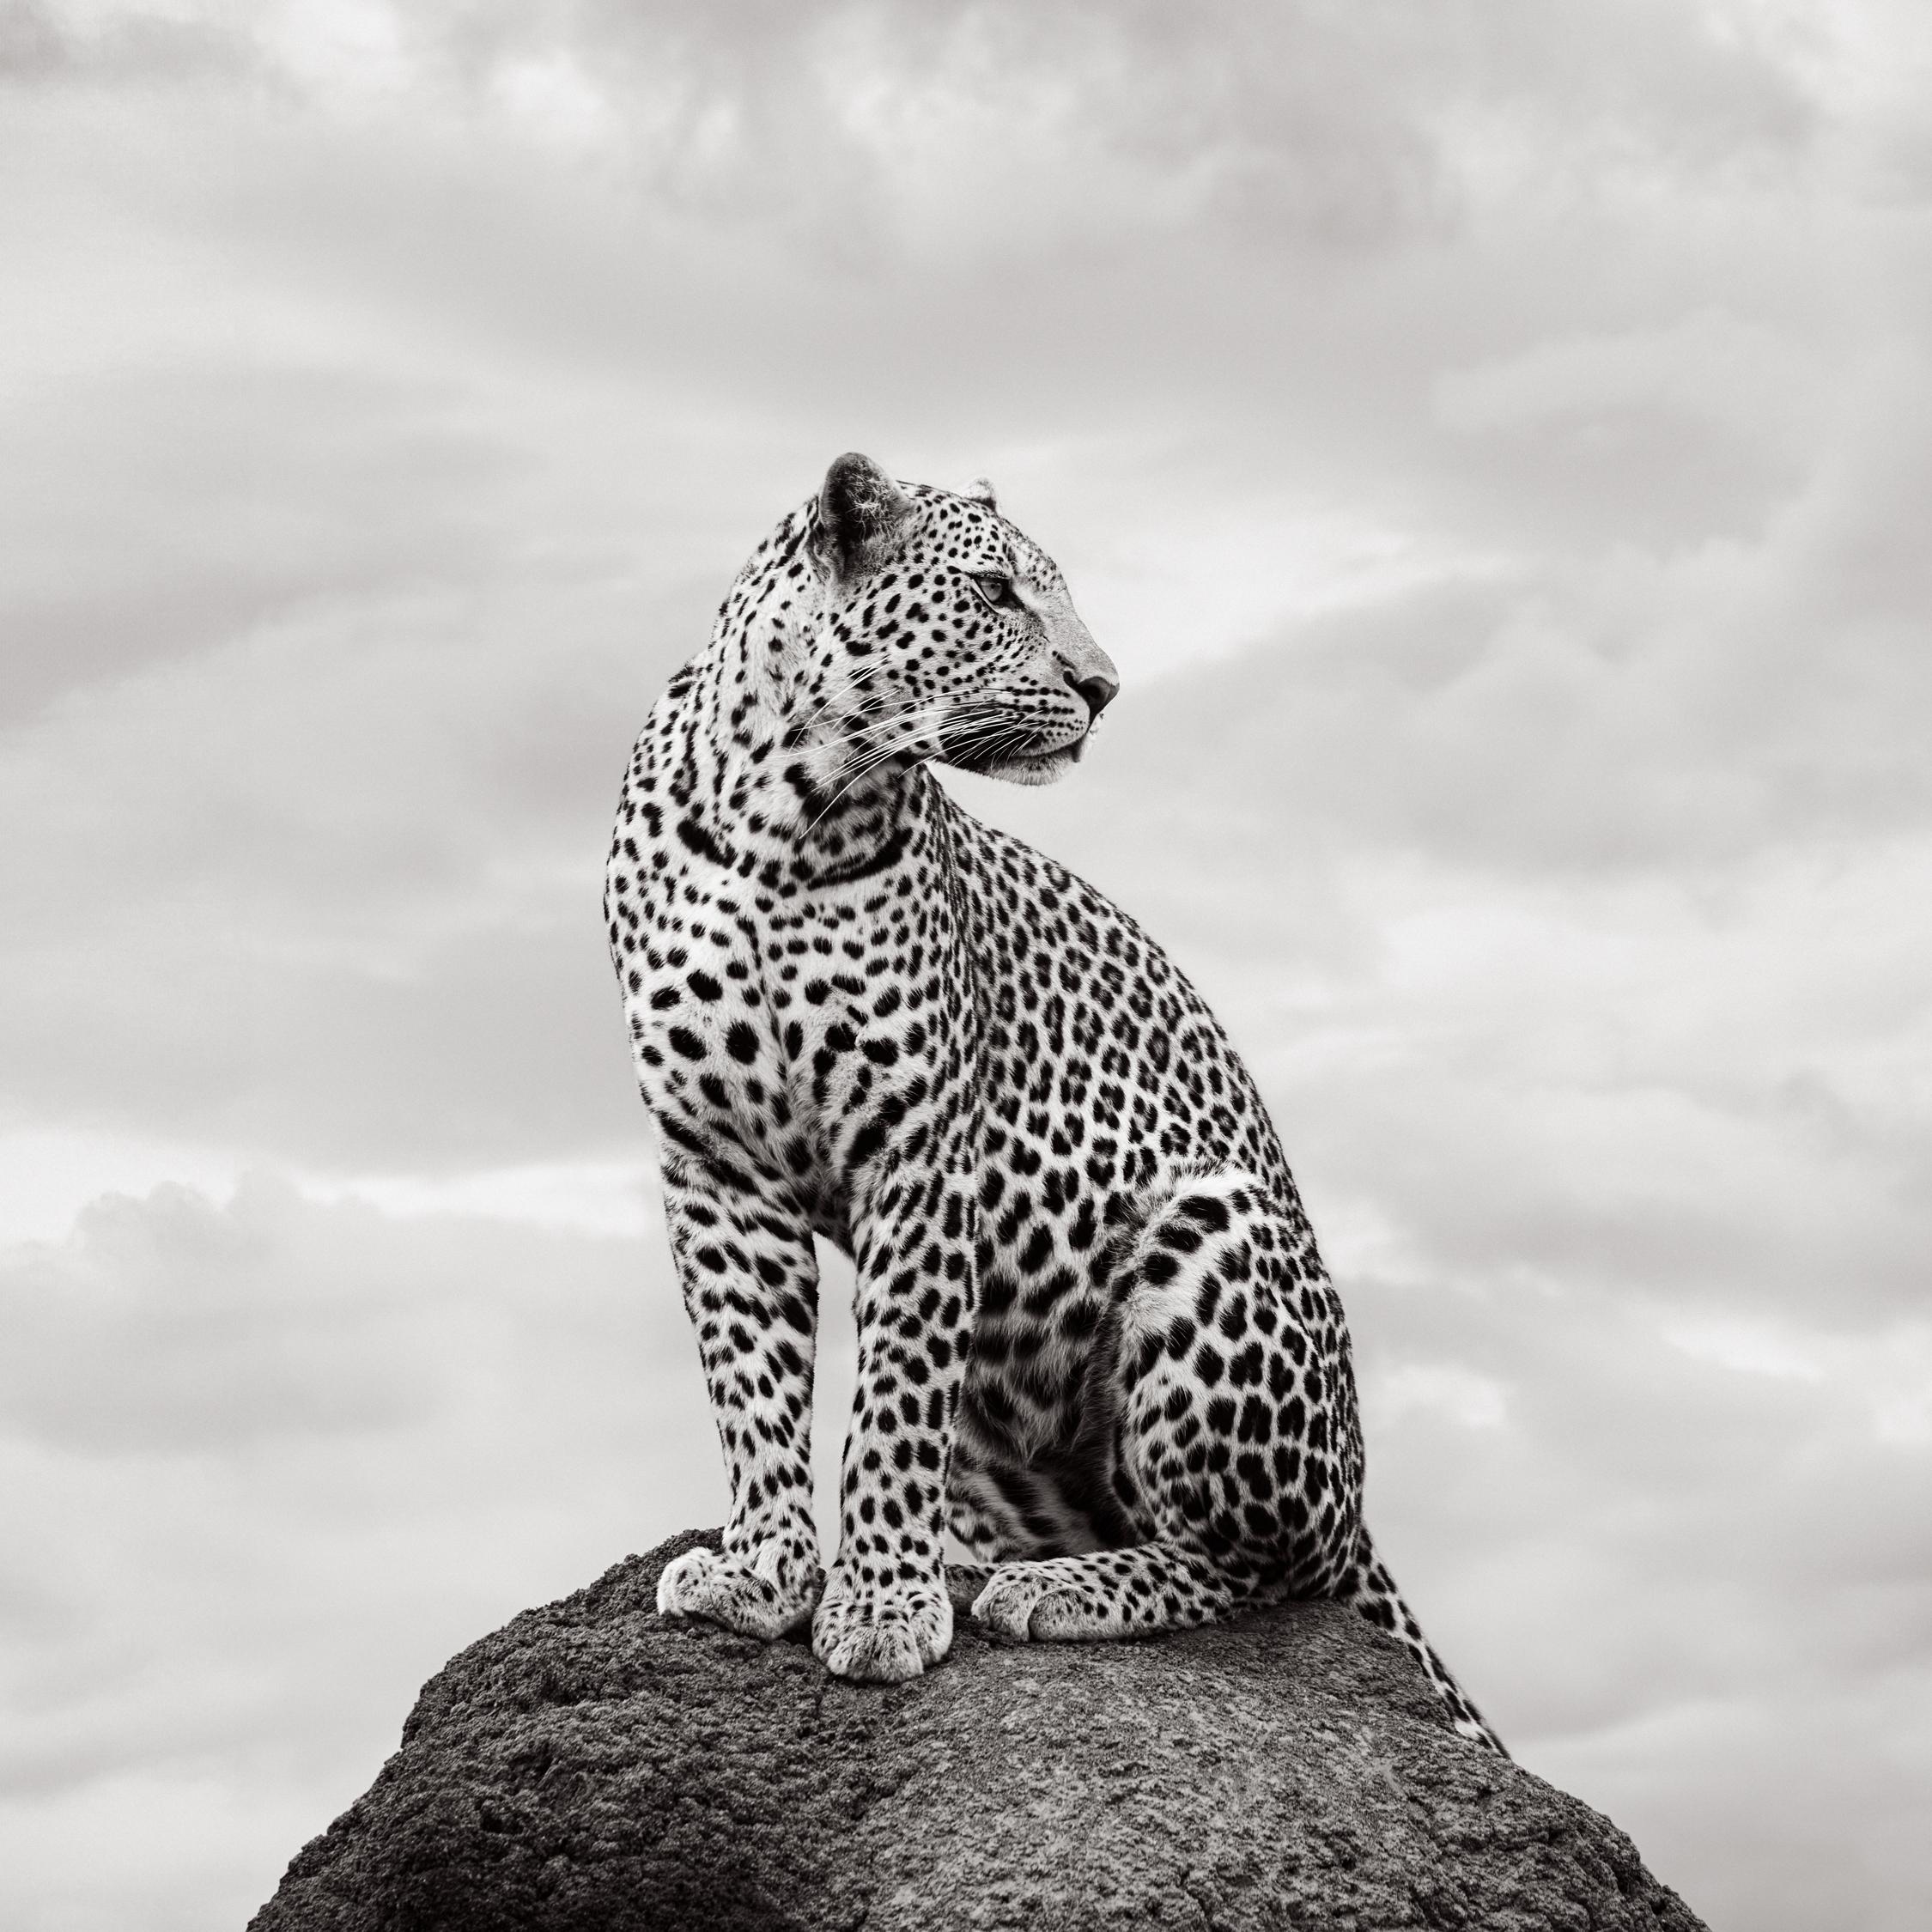 Drew Doggett Black and White Photograph - Black & white portrait of a leopard looking to the right atop a rock in Kenya